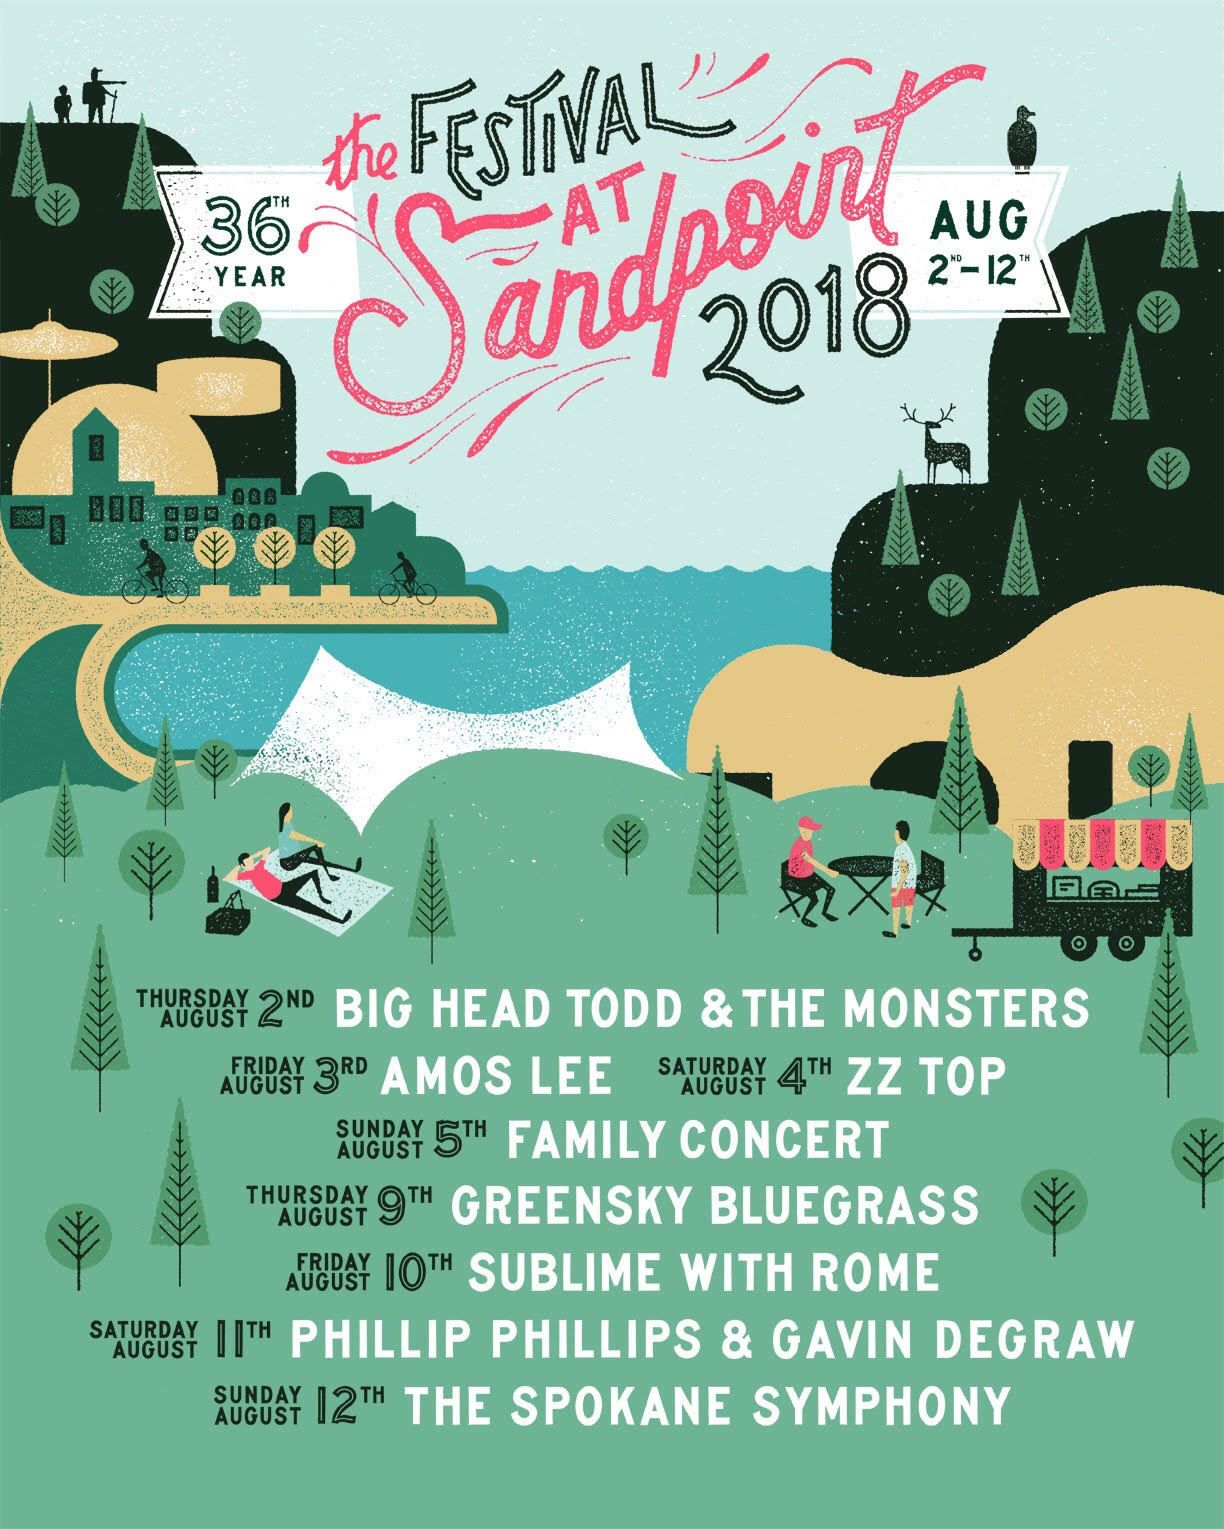 Big Head Todd heads to Sandpoint, ID in August for The Festival at Sandpoint! 